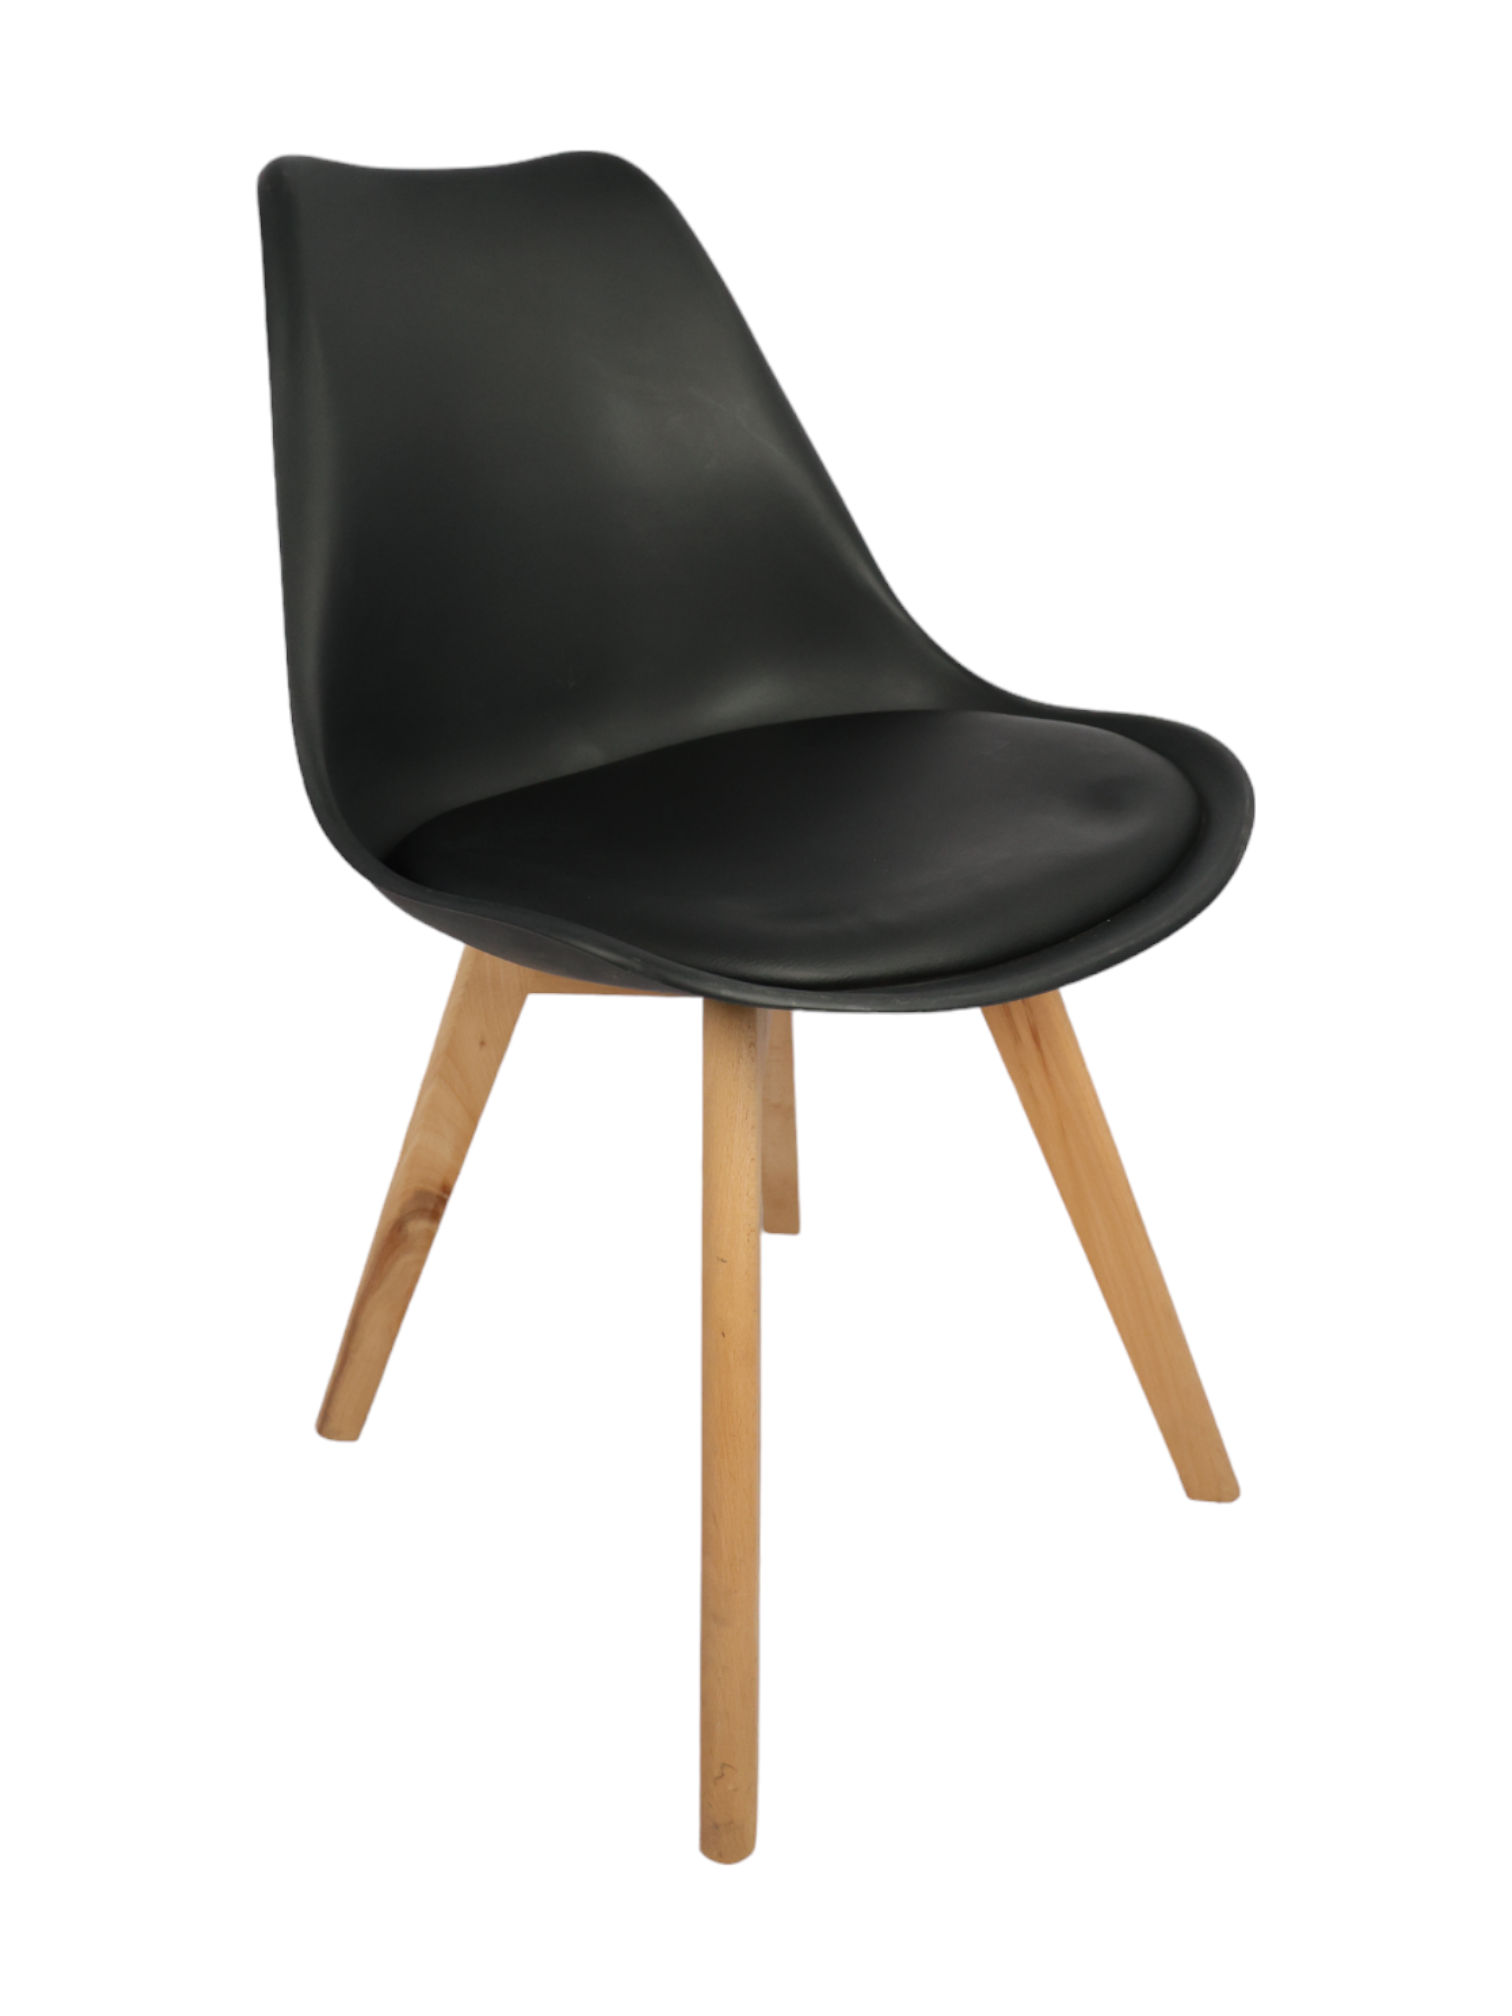 Adhunika Caf Furniture Chair with Wooden Legs-Black